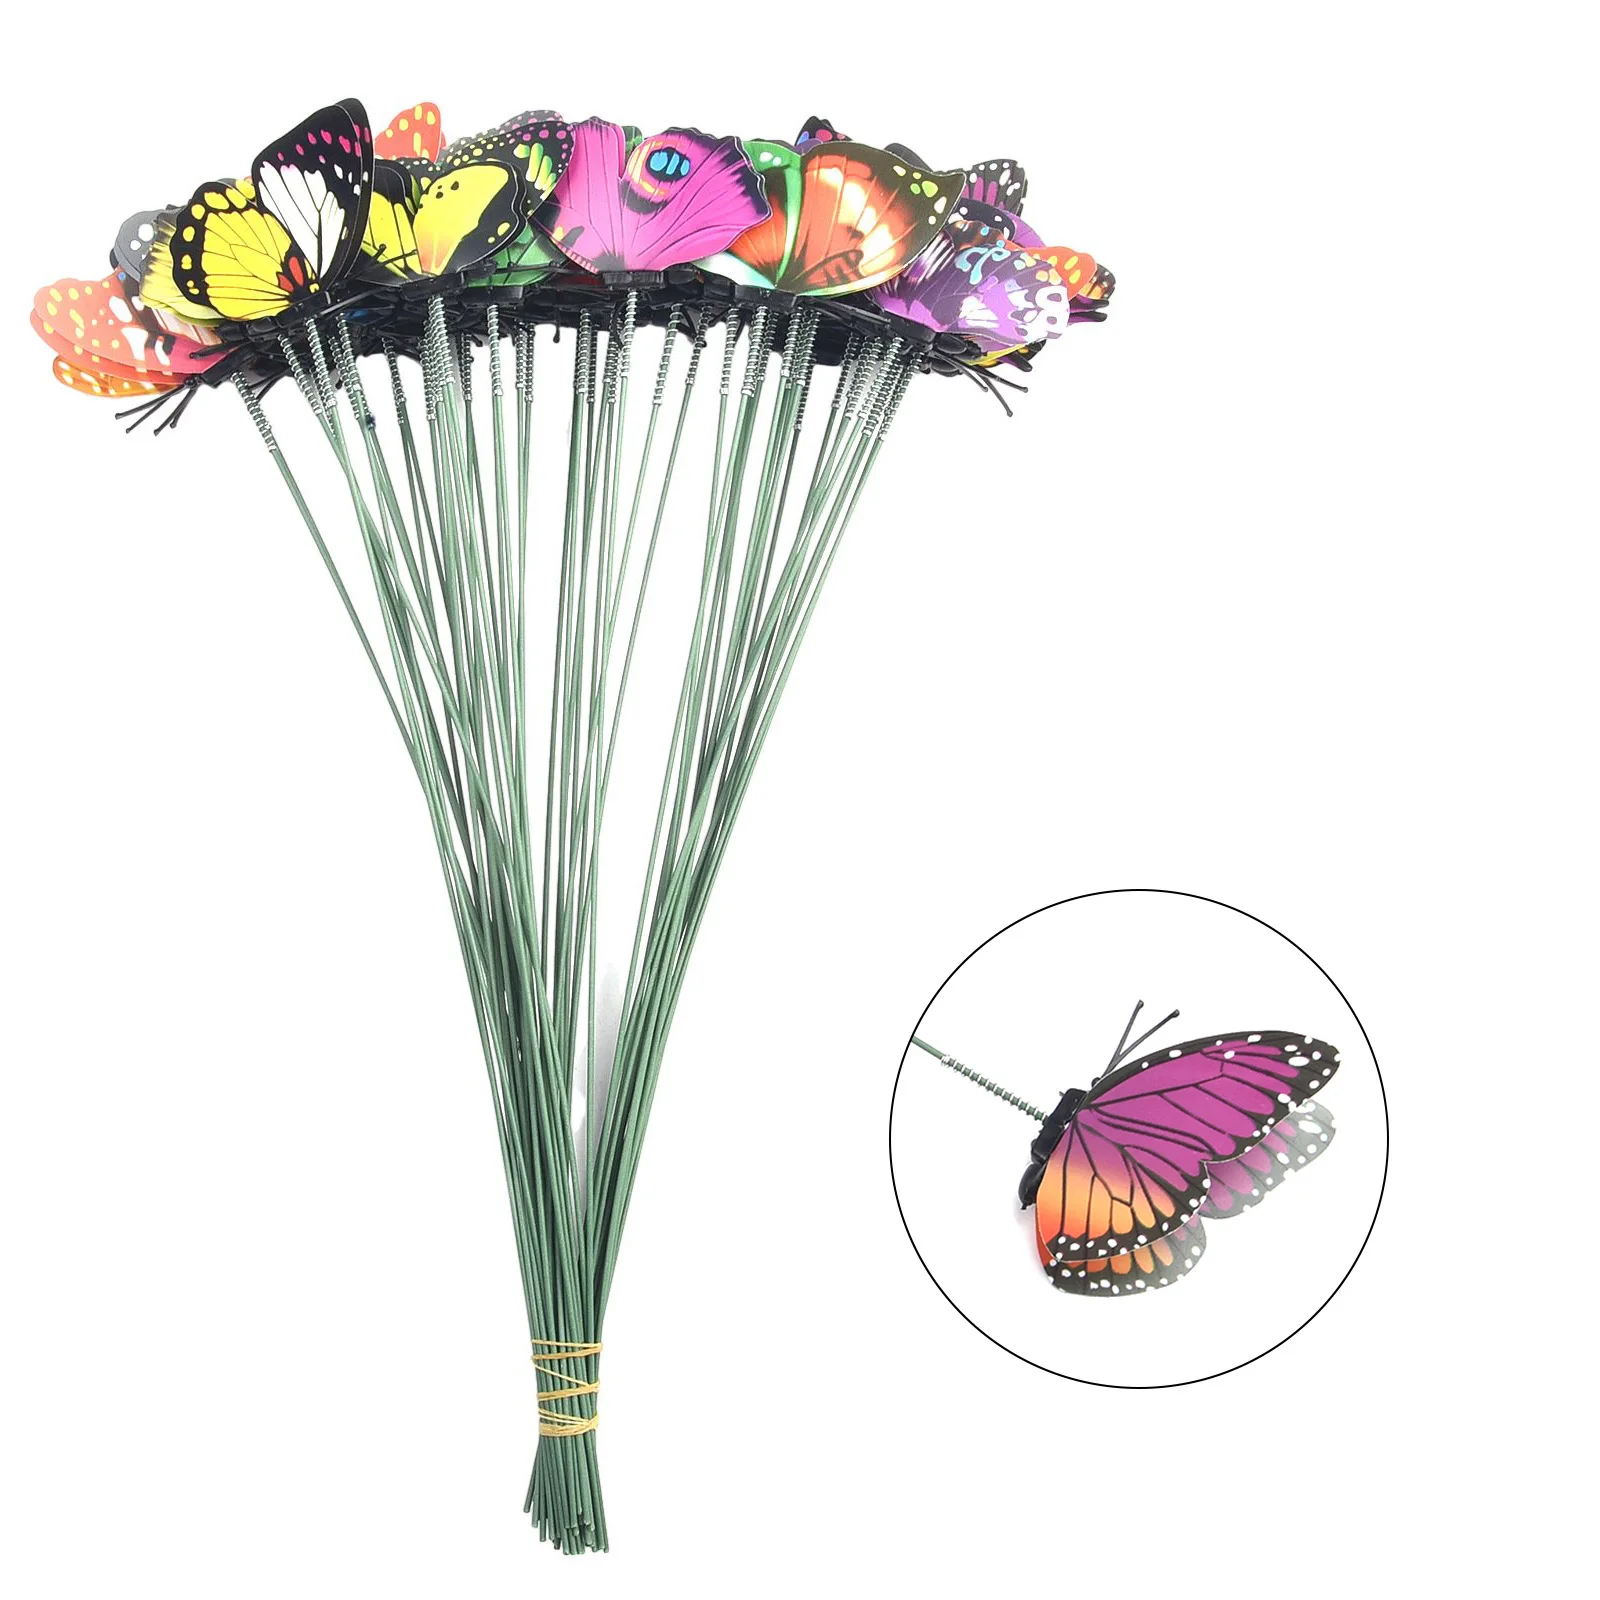 

Decor Butterfly Stakes Bed Useful Flower Functional Garden Home Decoration PVC Parts Party 7*25cm Professional